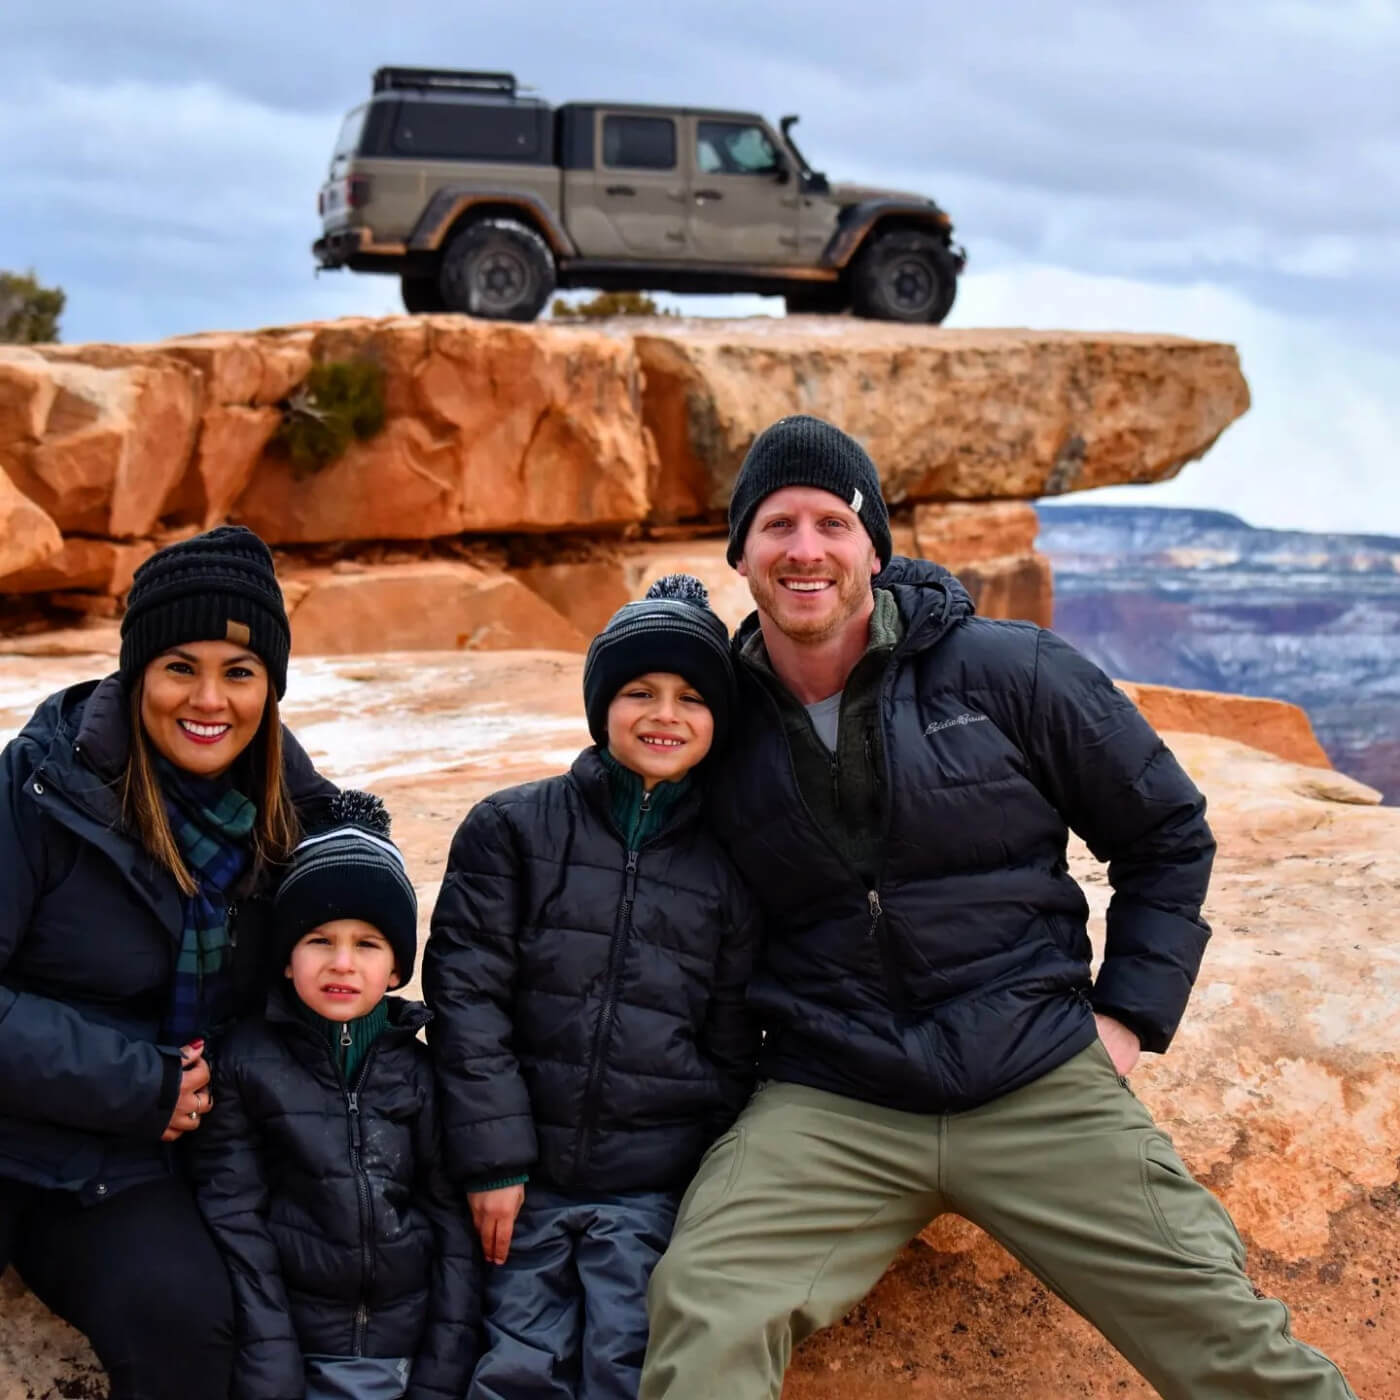 Kenny and family during an off-road adventure with their Jeep